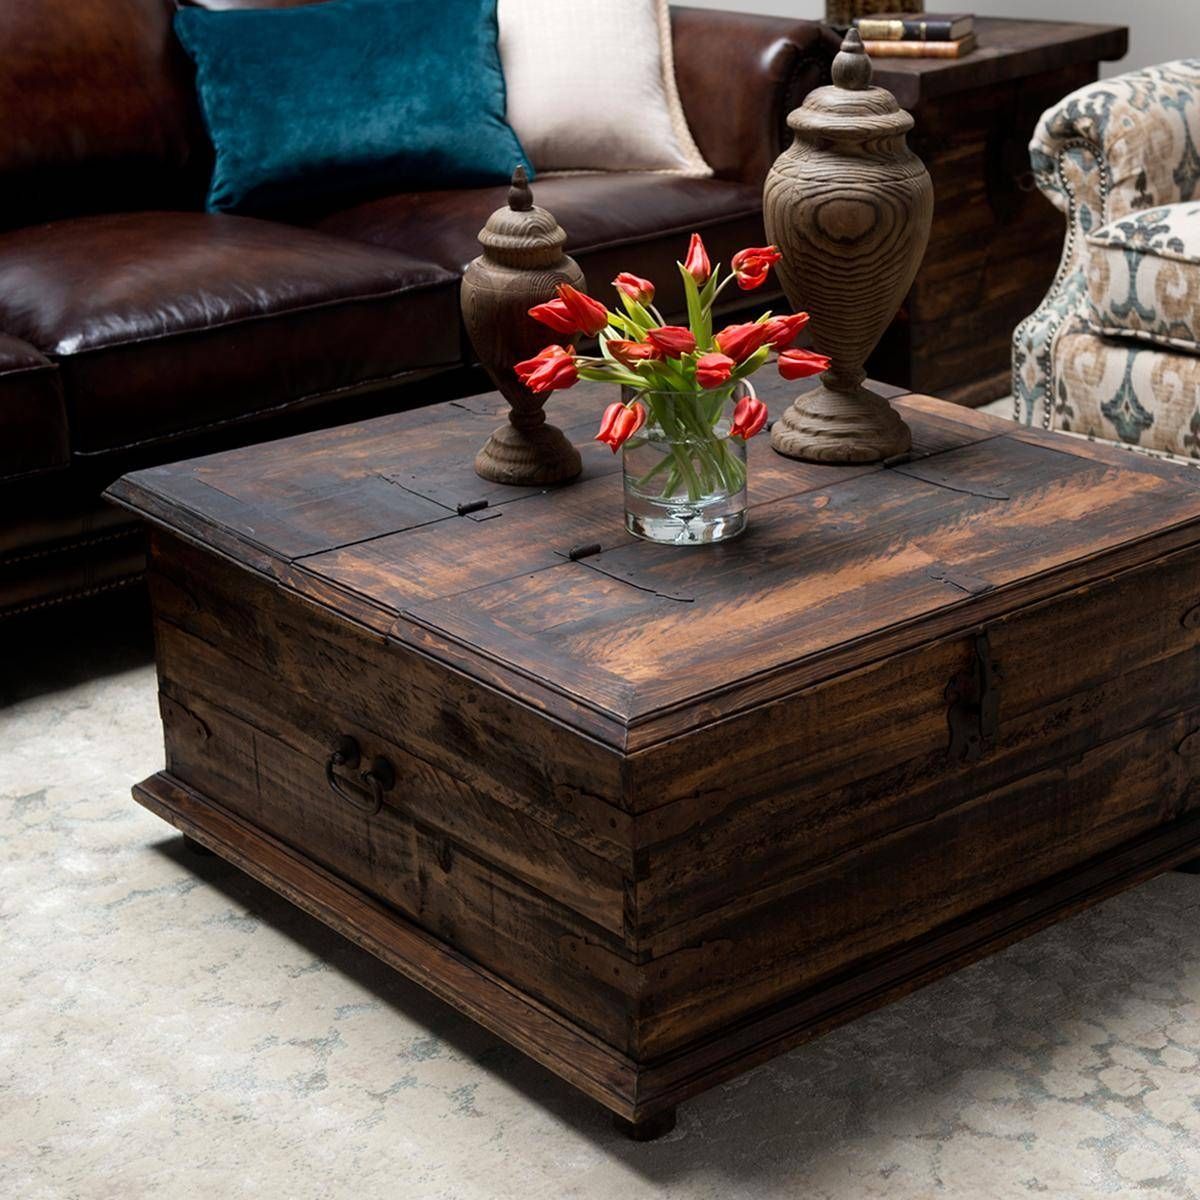 Furniture: Unique Rustic Coffee Table For Elegant Living Room For Square Wood Coffee Tables With Storage (View 27 of 30)